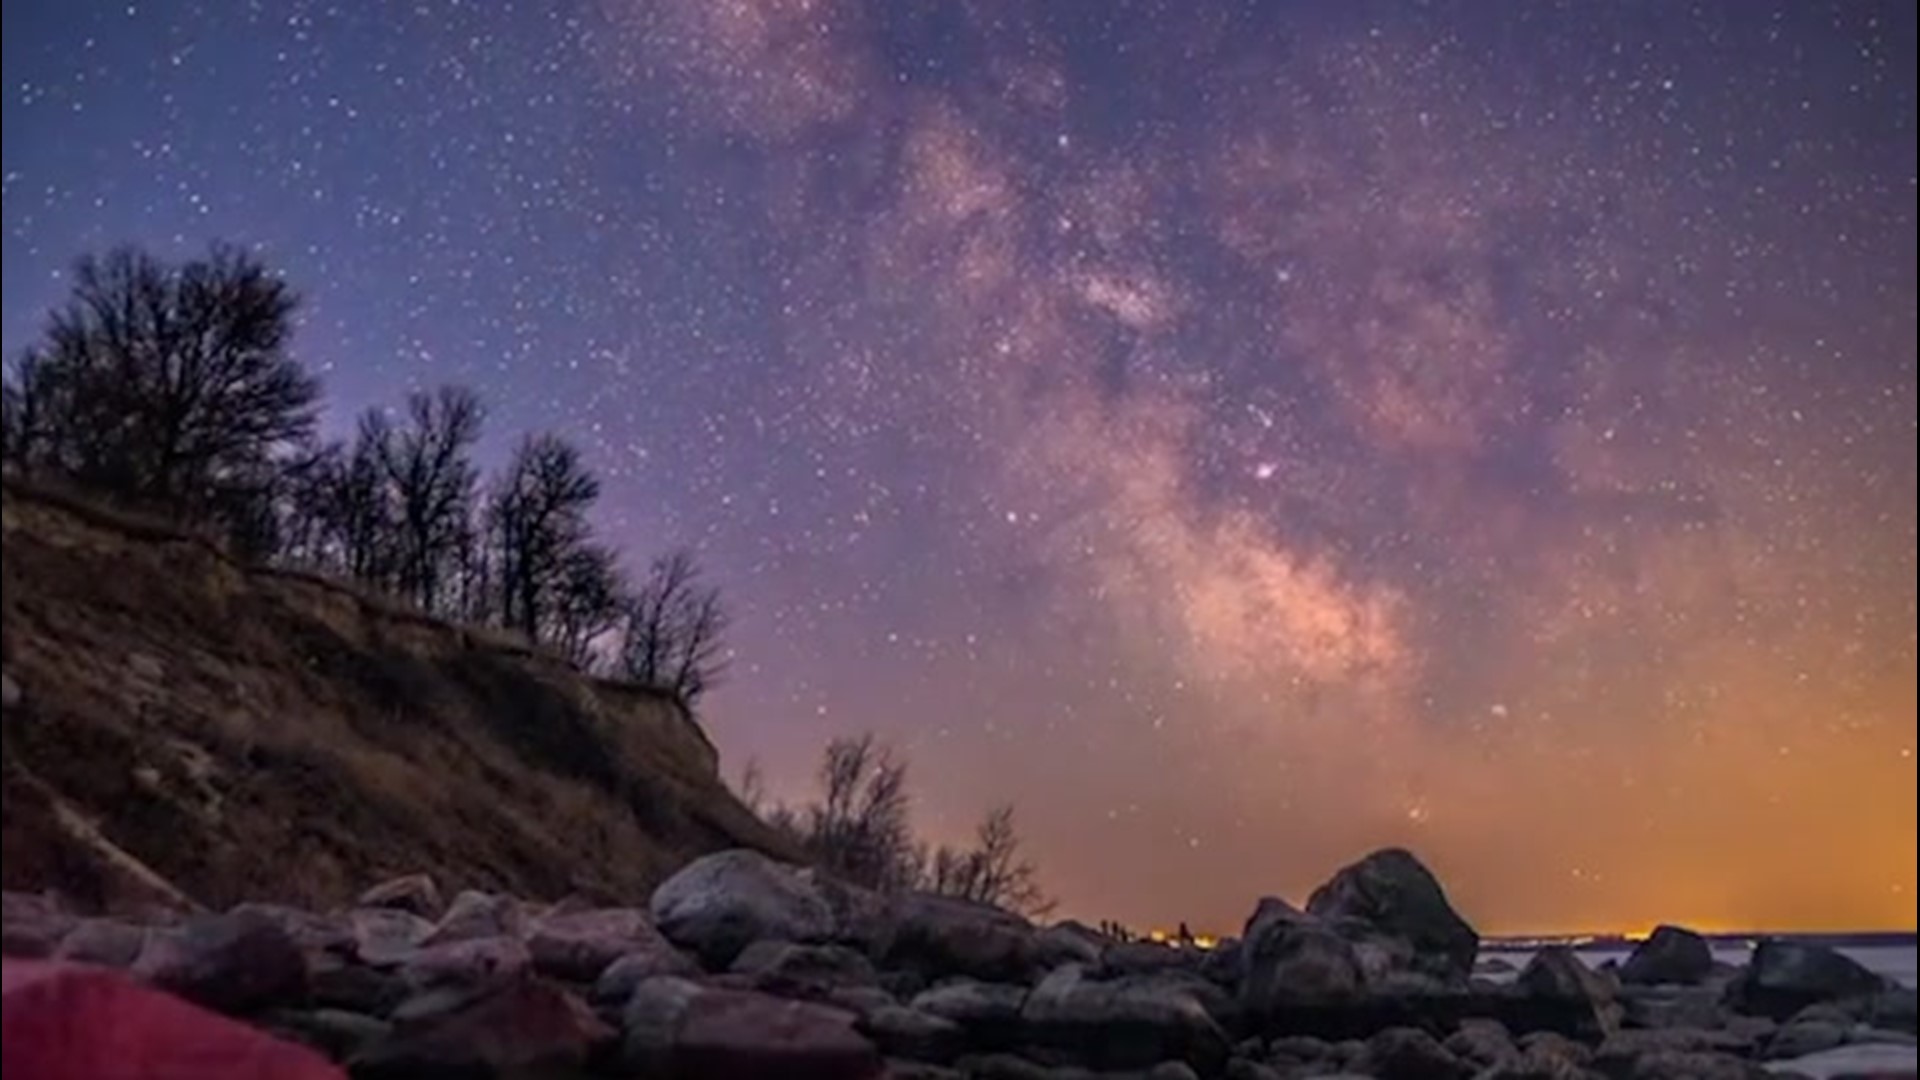 Time-lapse video captured by Instagram user @southbasin.photoworks shows stars and satellites moving across a colorful night sky over Manitoba, Canada.